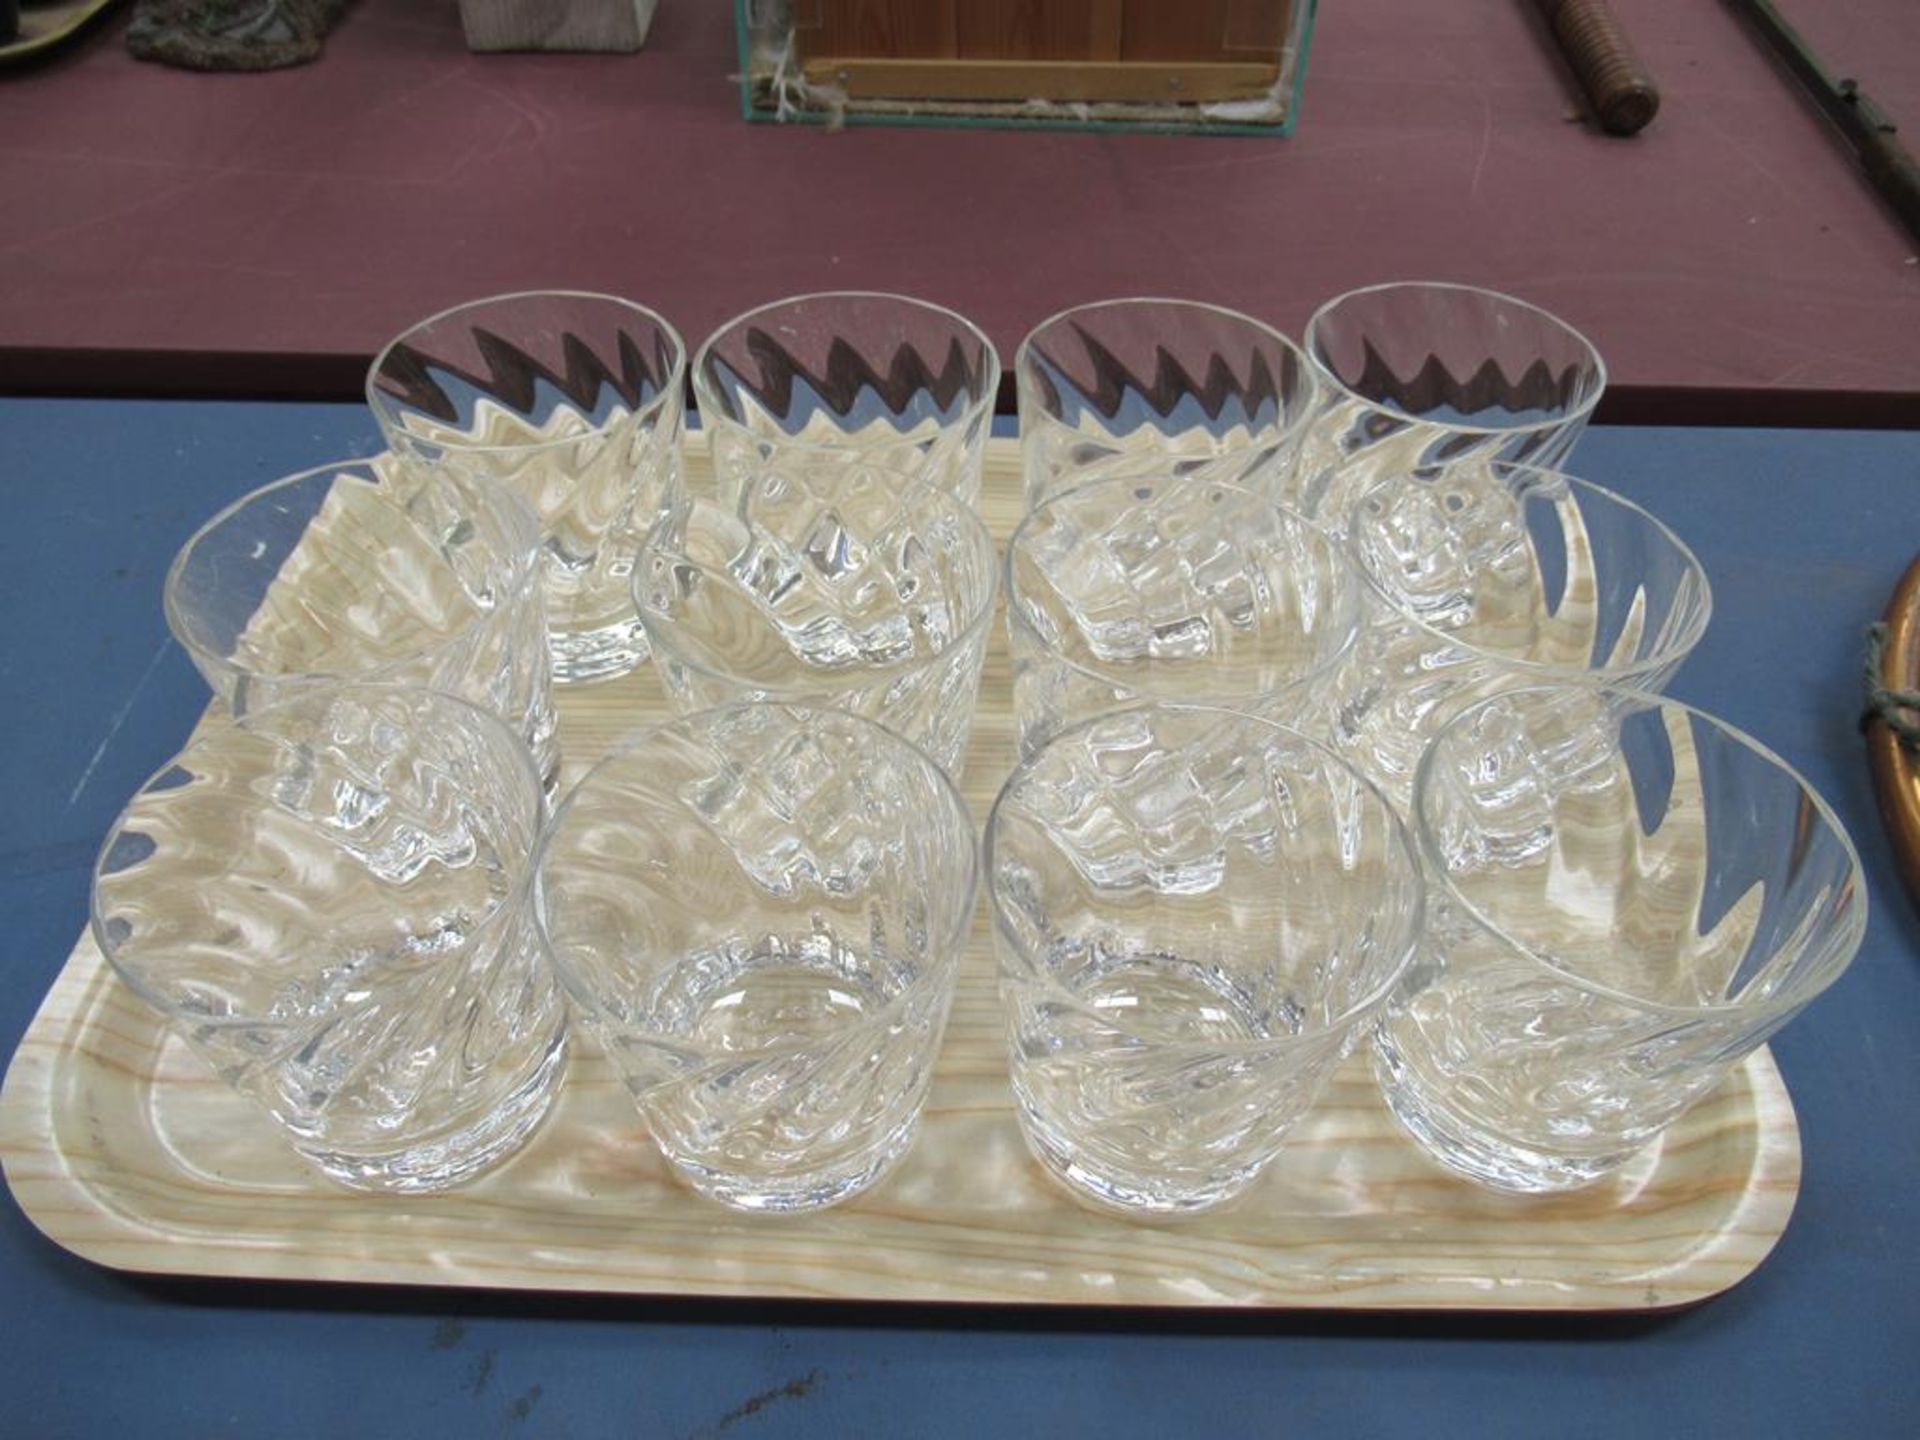 A Gibraltar Glass Jug with Twenty Drinking Glasses - Image 3 of 4